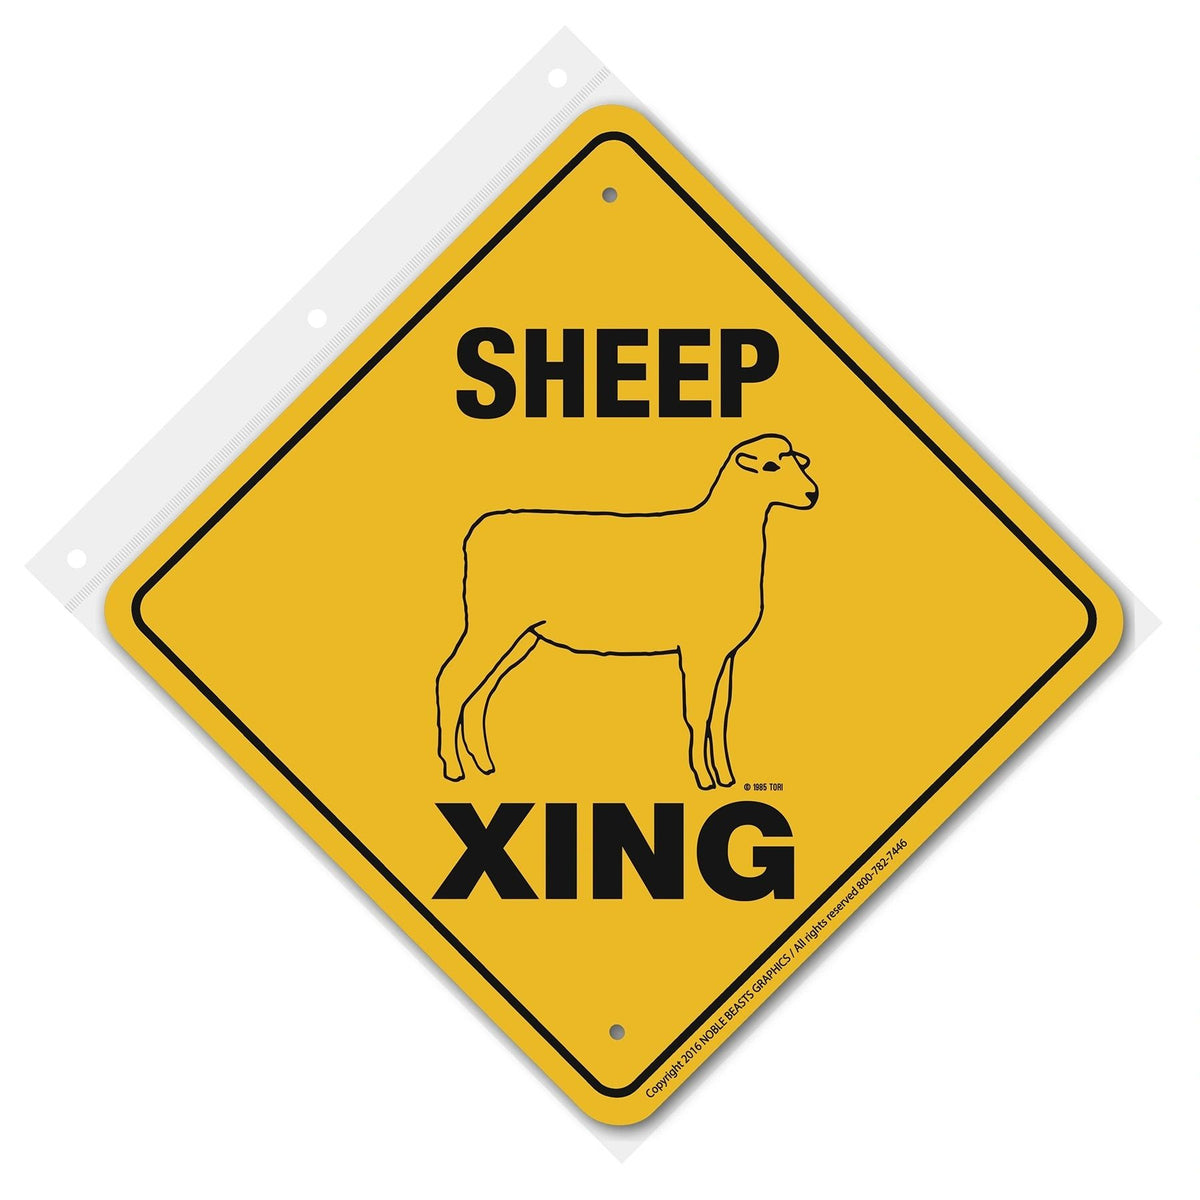 Sheep (Generic White Face) Xing Sign Aluminum 12 in X 12 in #20929